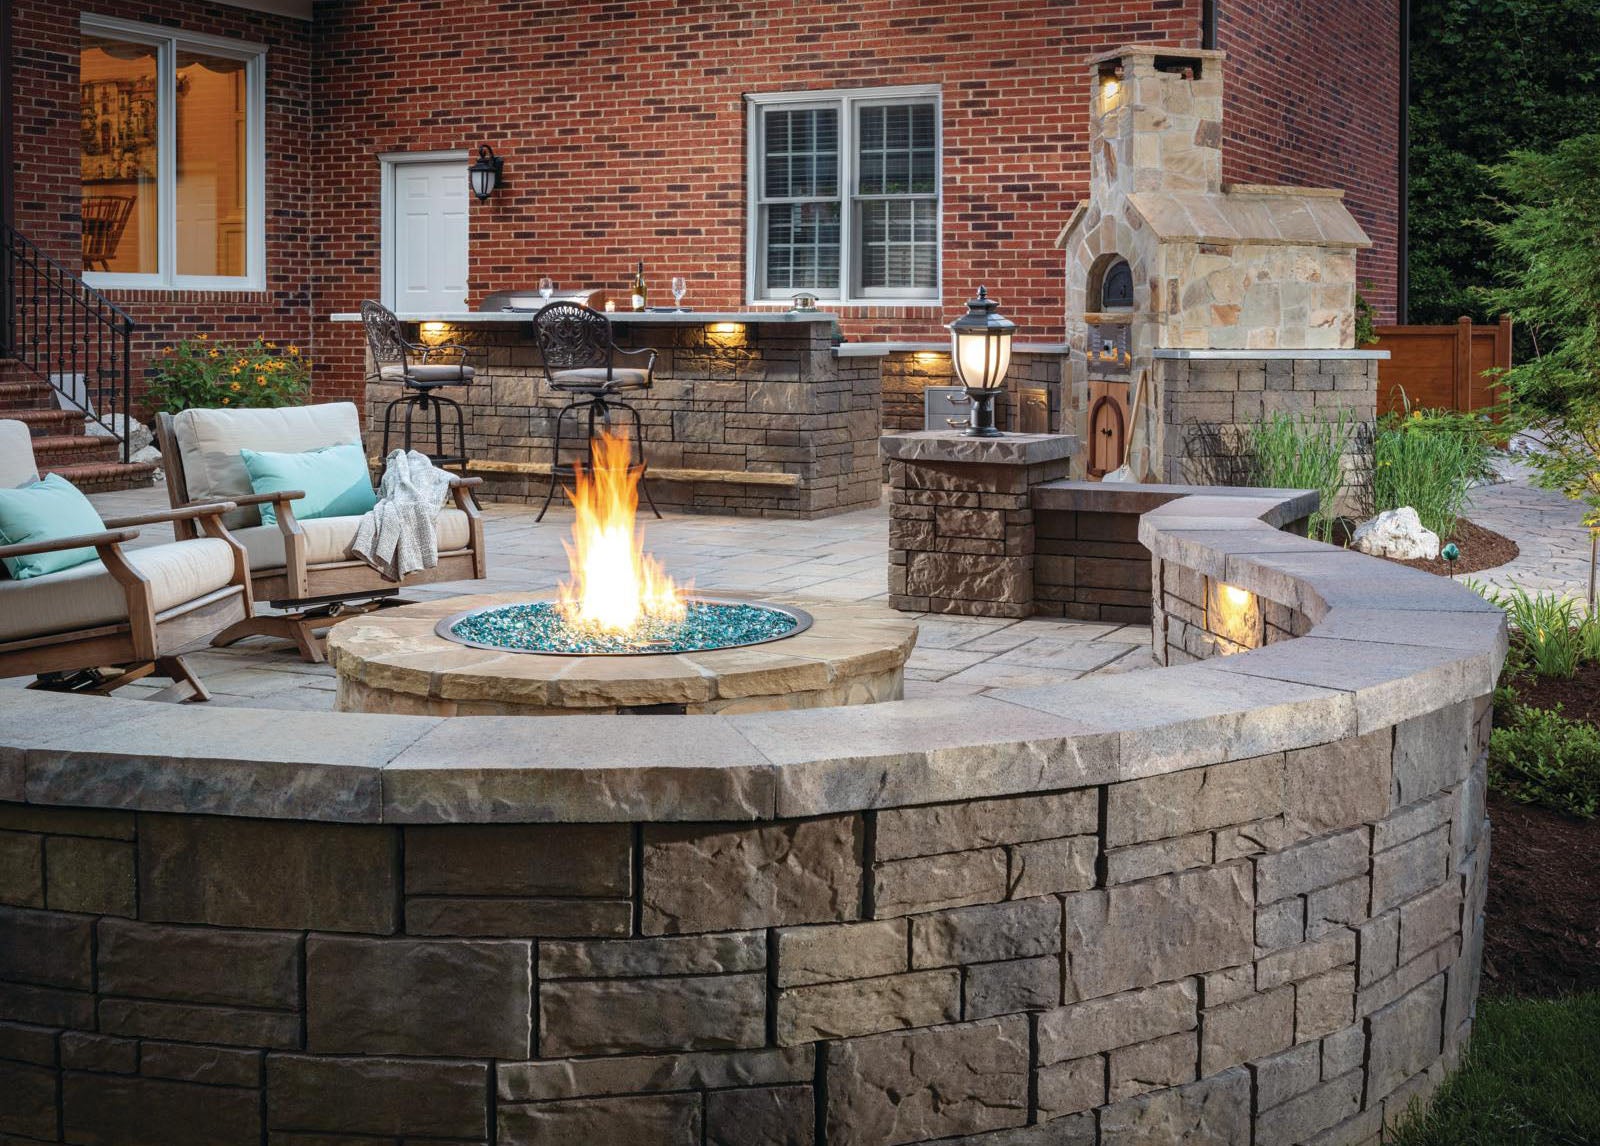 Designing A Patio Around Fire Pit, How To Make A Fire Pit On Top Of Concrete